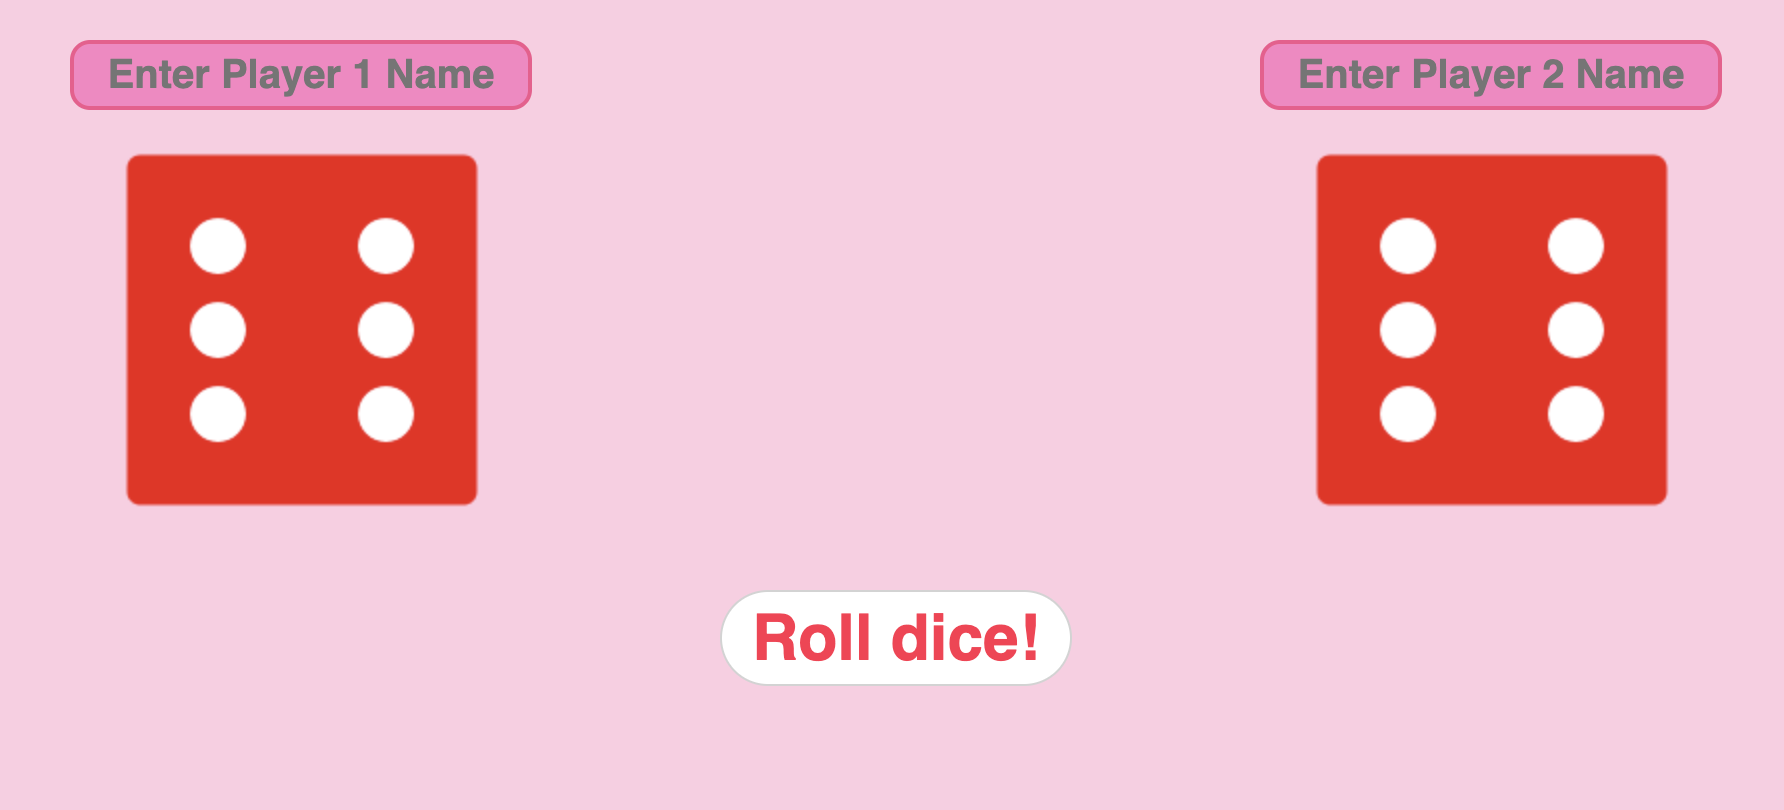 Dice Game Image